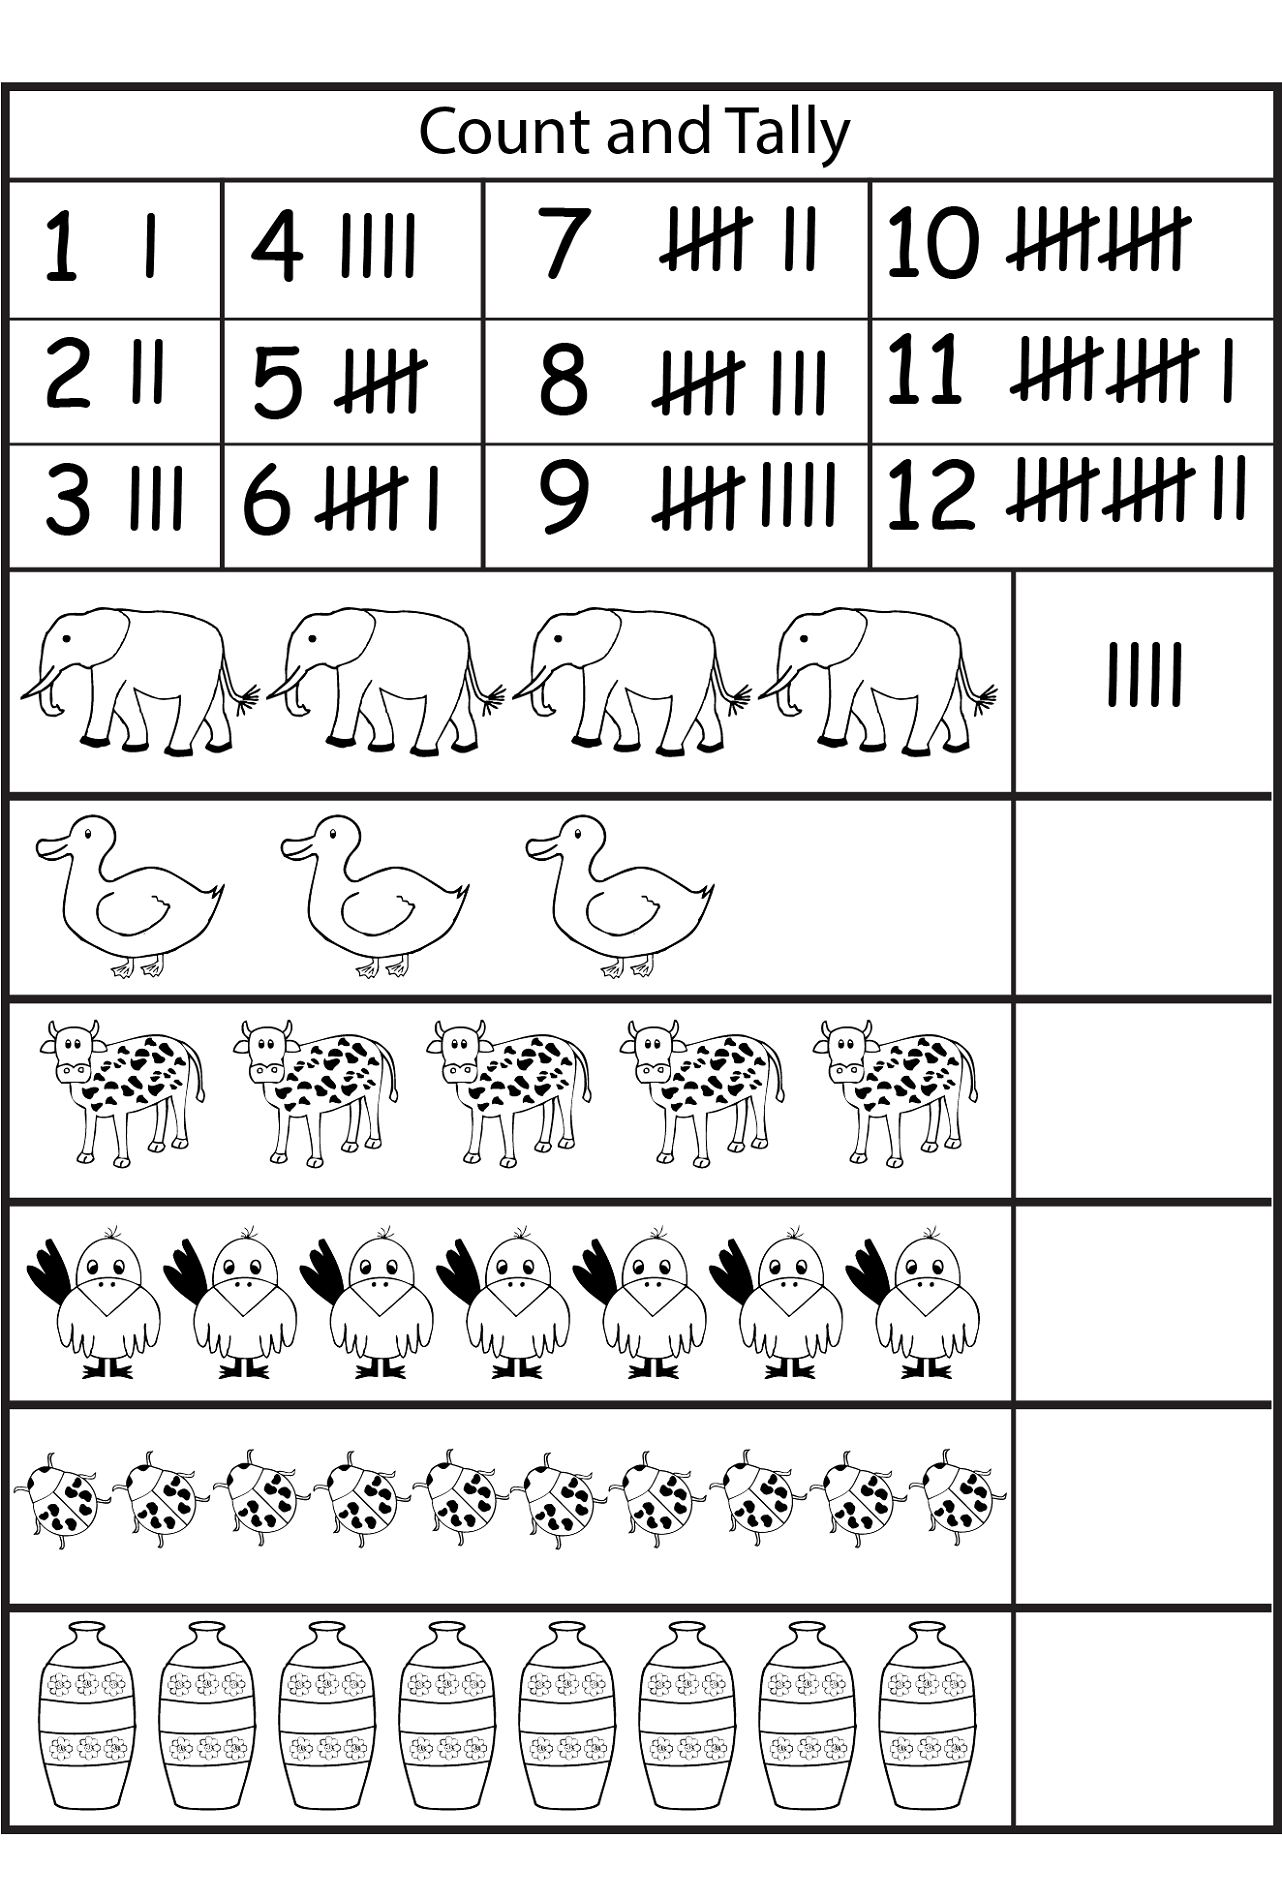 tally mark worksheet with pictures